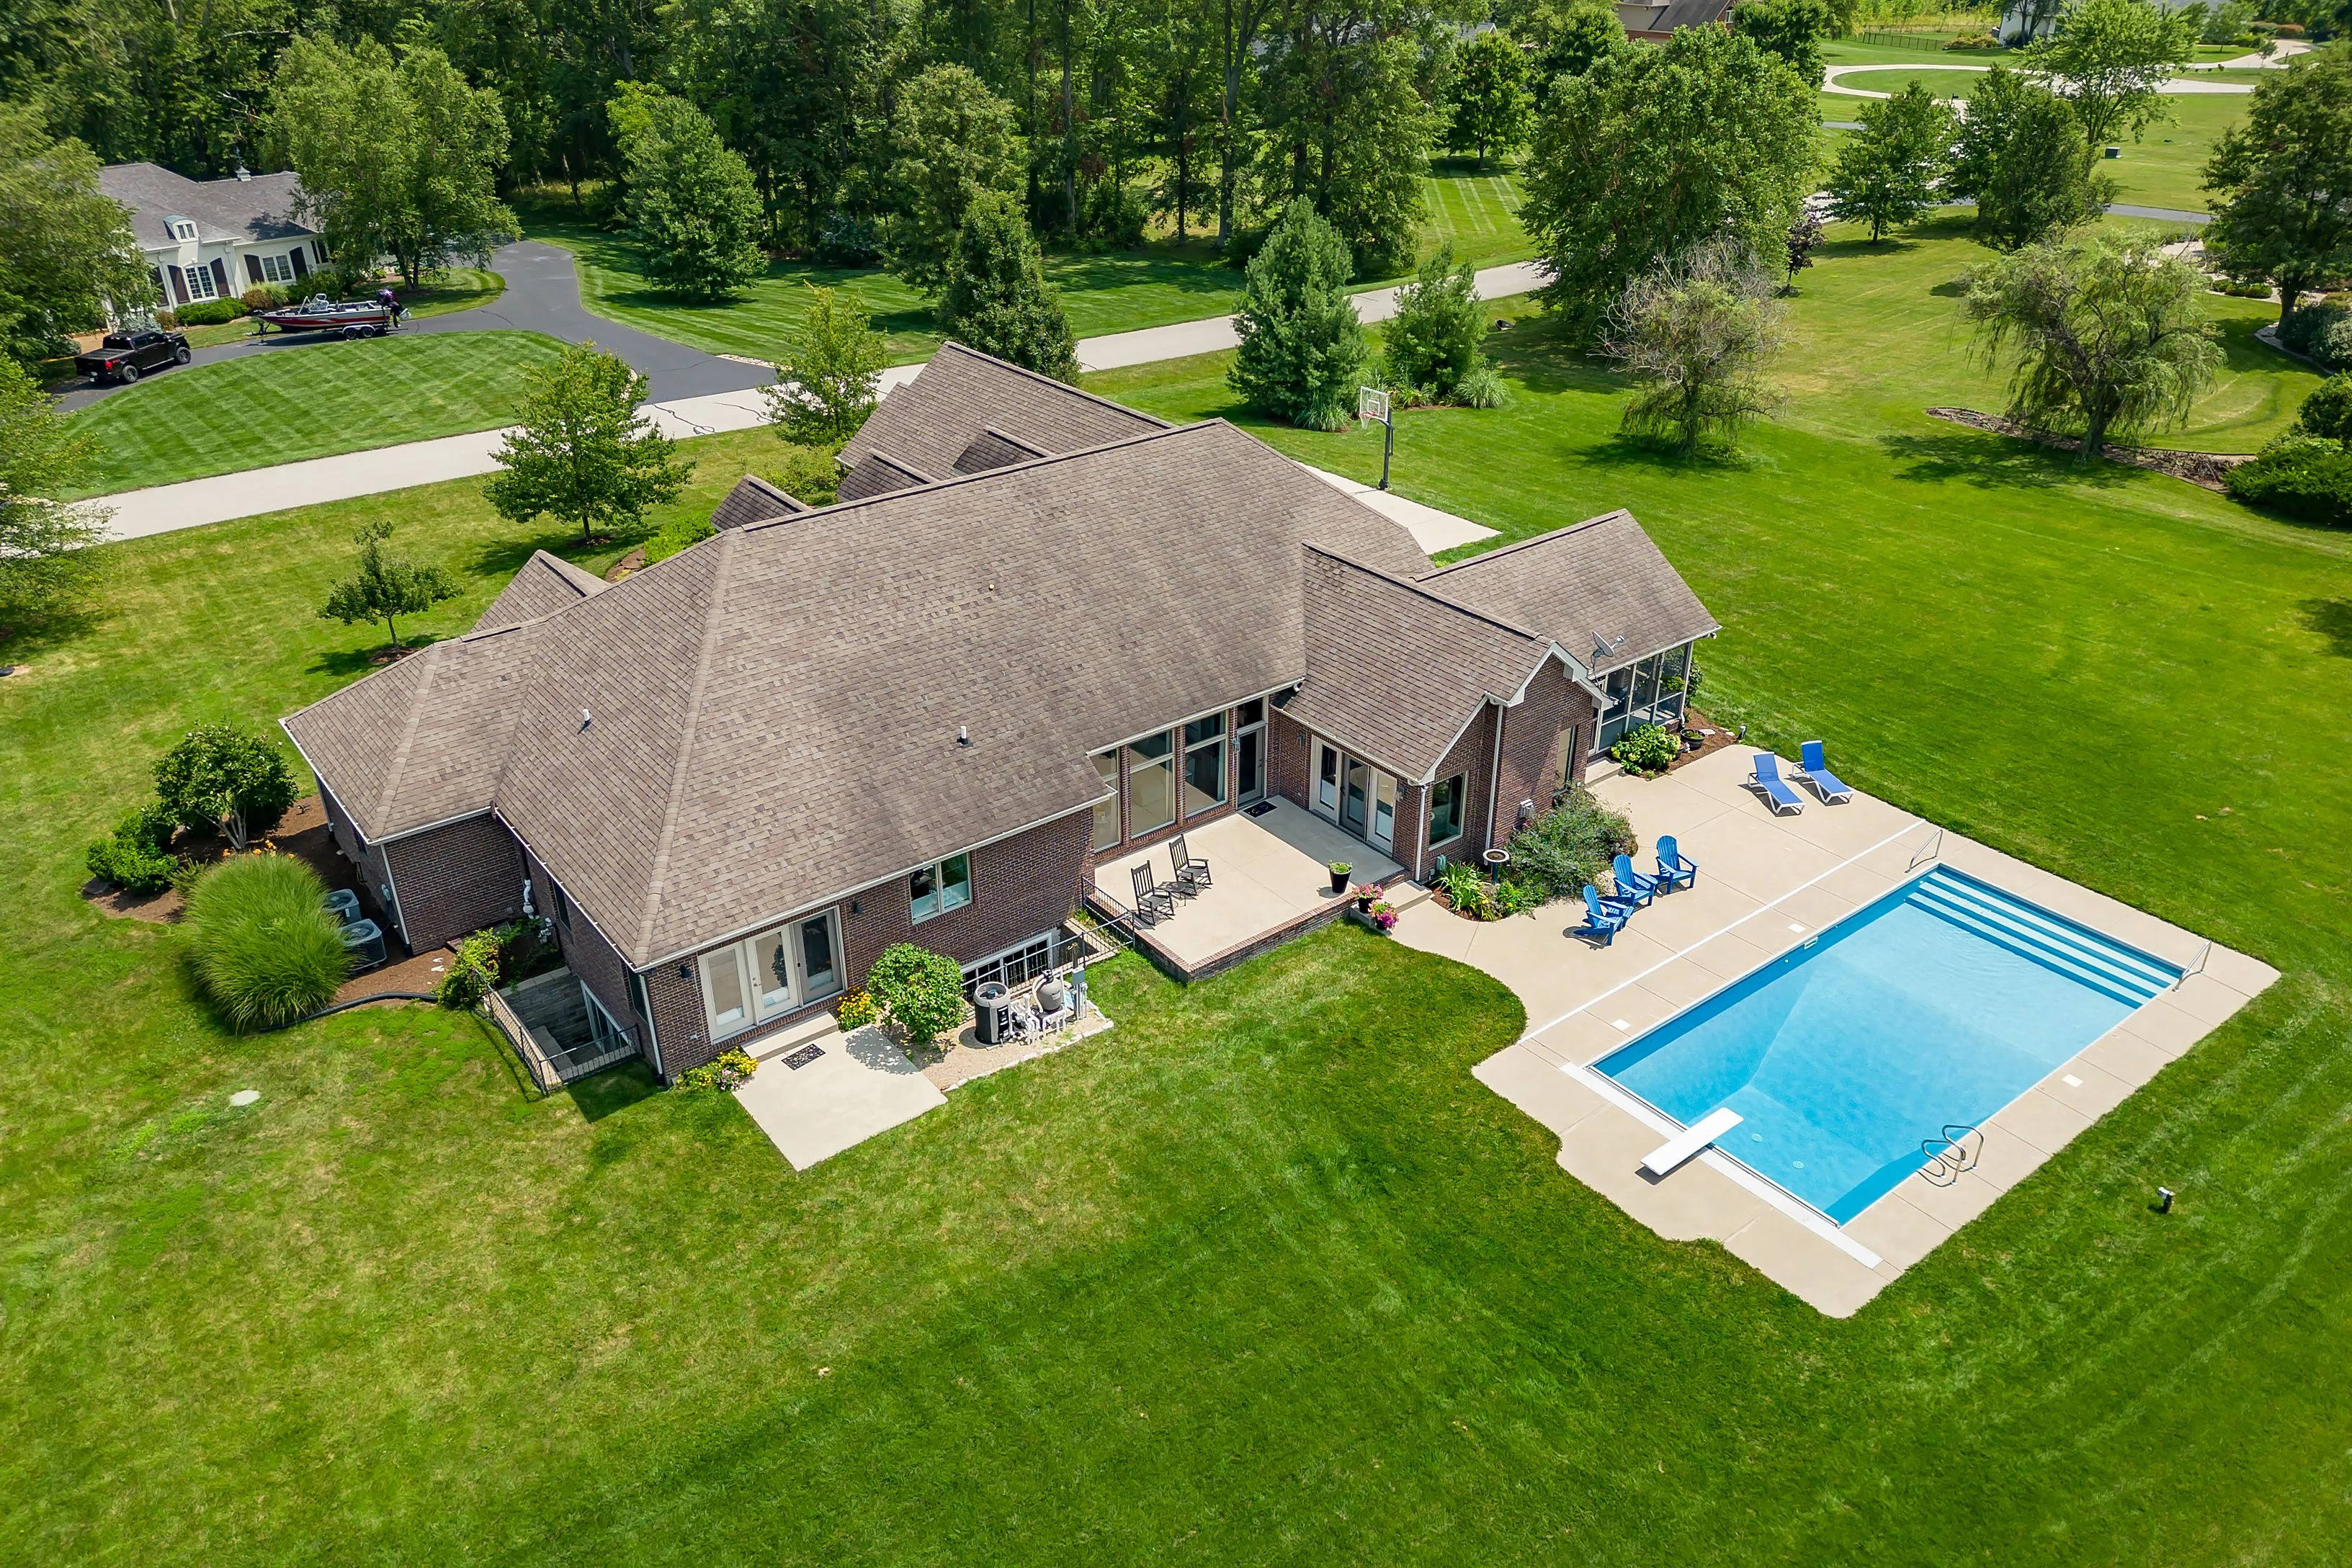 Aerial view of a suburban house with a large backyard and an outdoor swimming pool.